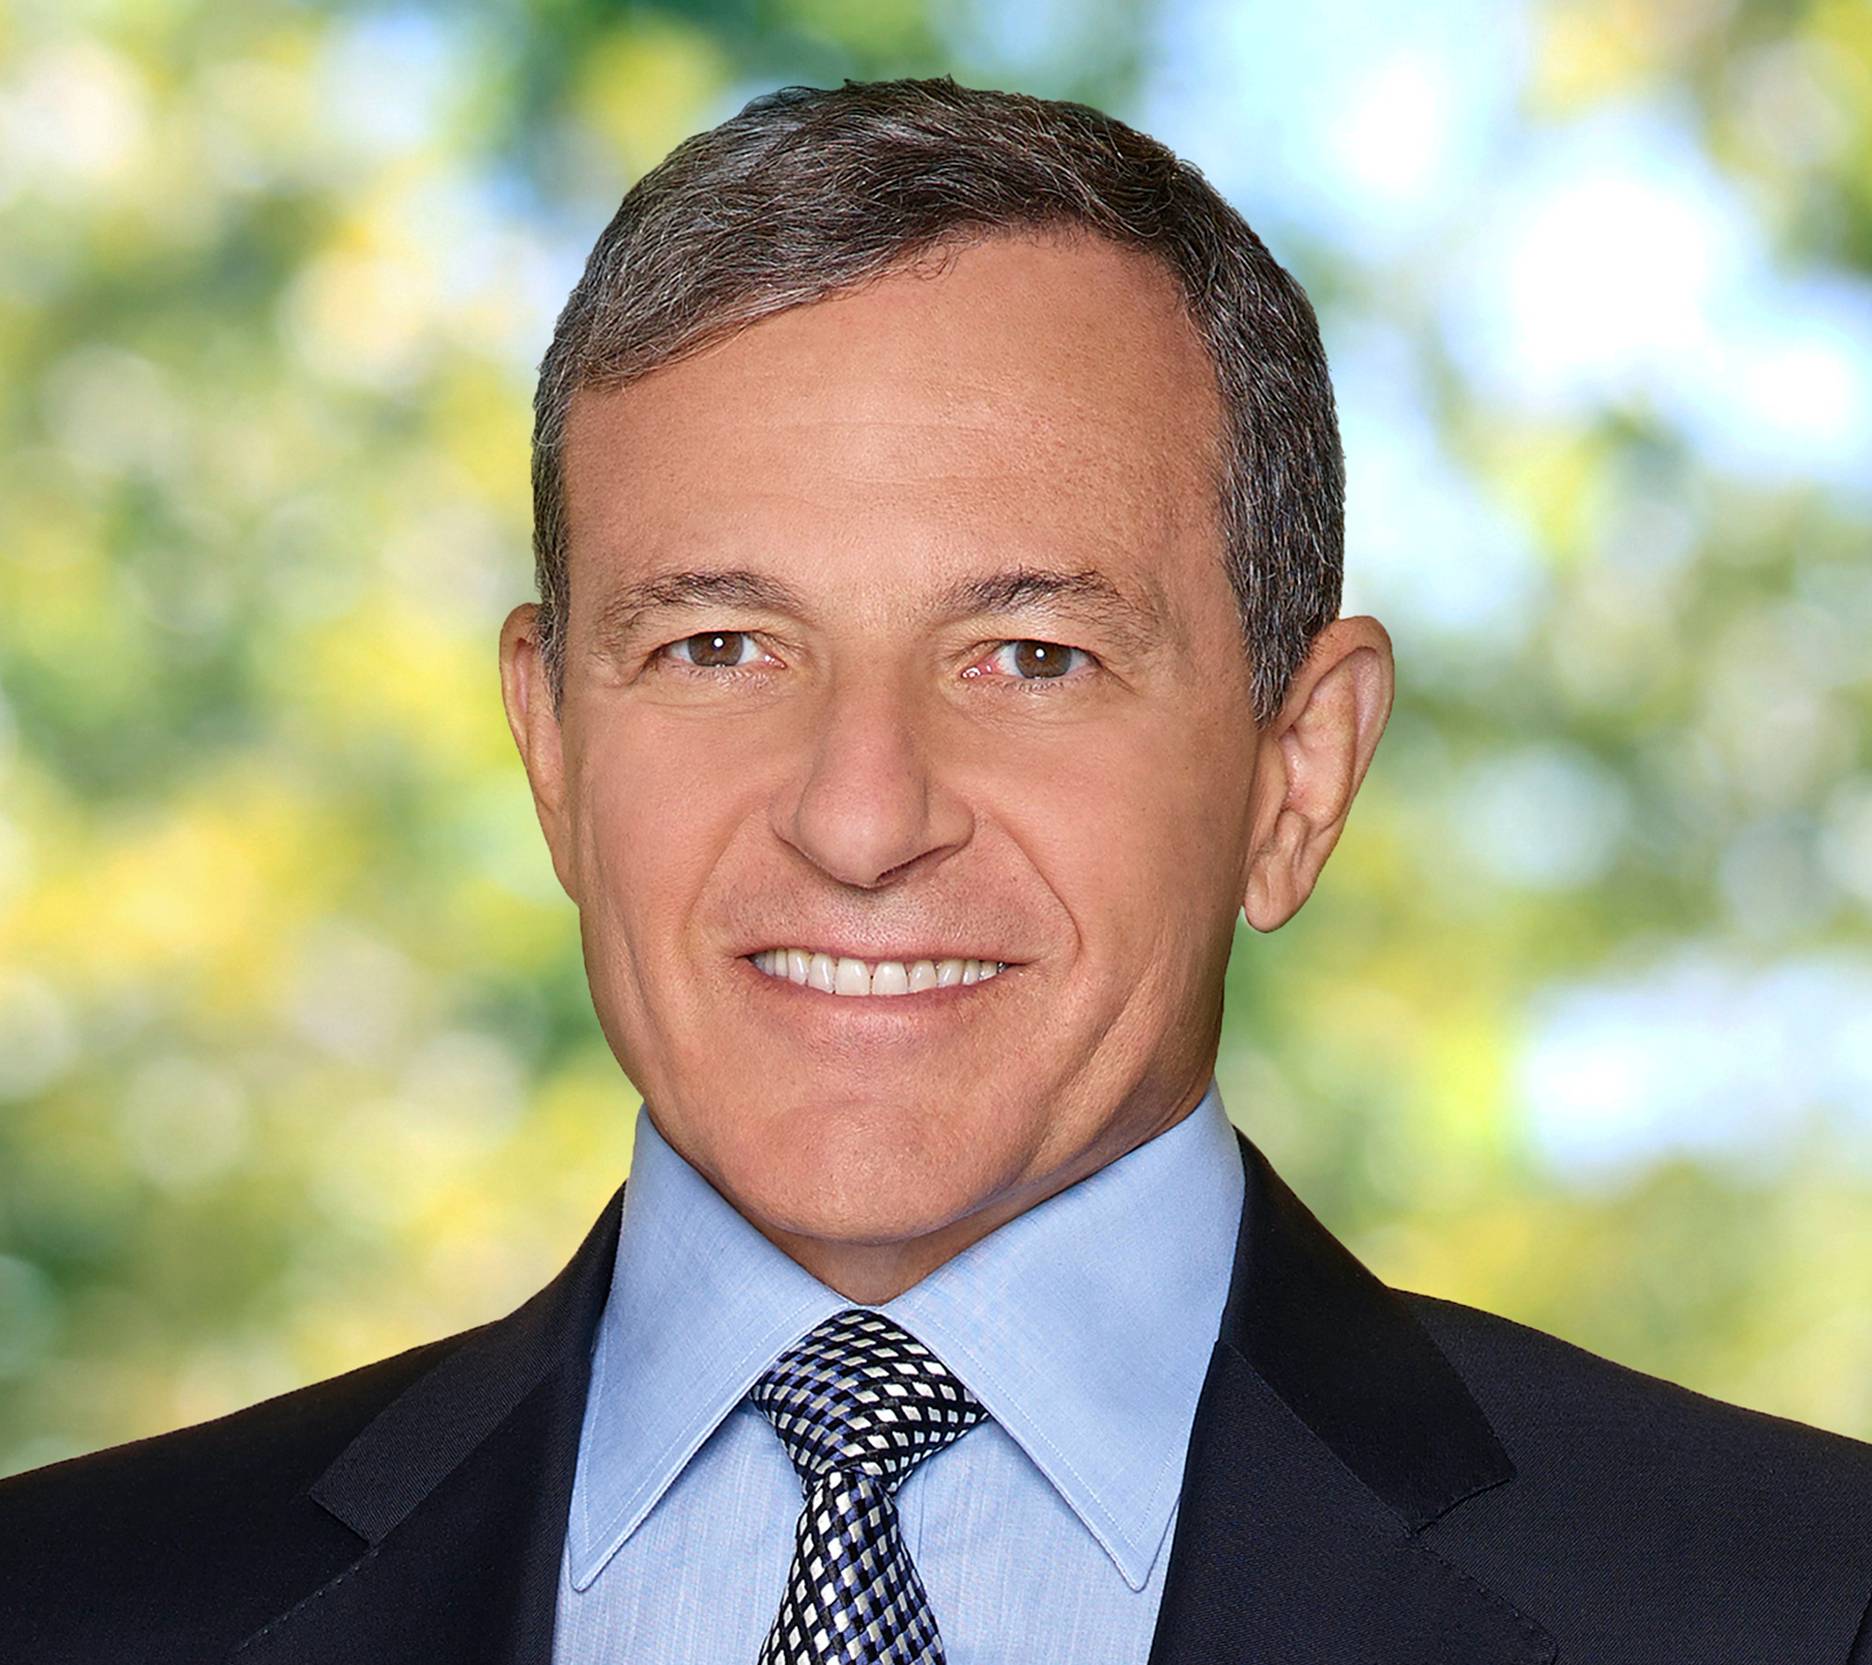 Disney CEO Bob Iger says that theme park demand is softening from peak post-COVID travel